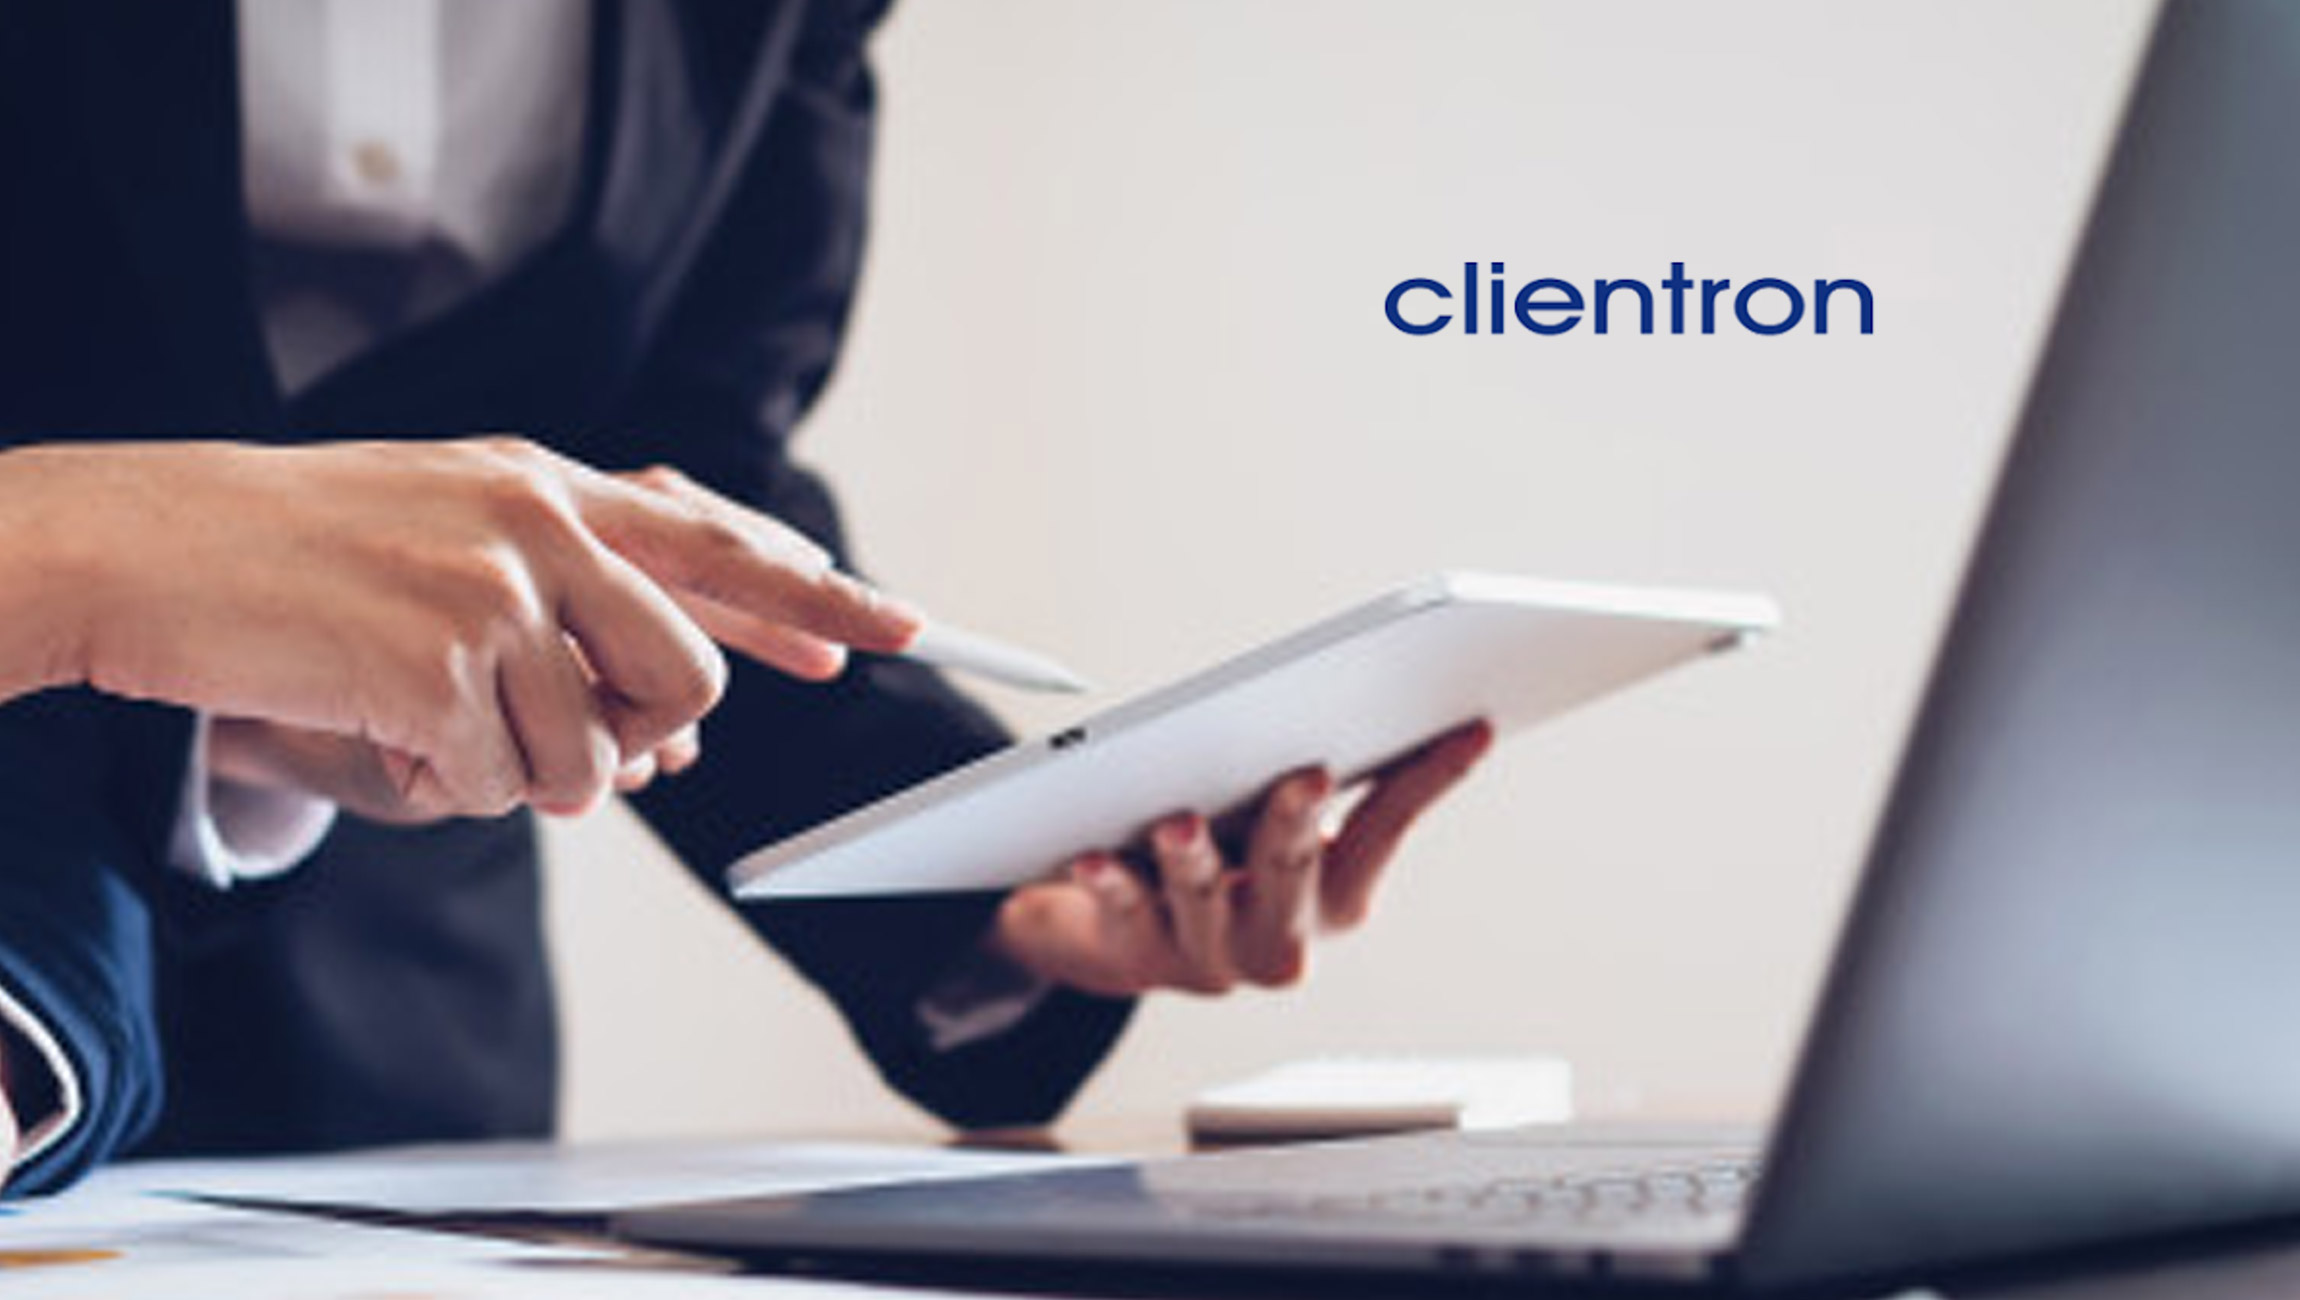 Clientron , A Cutting-edge POS System with Slim Edge Bezel